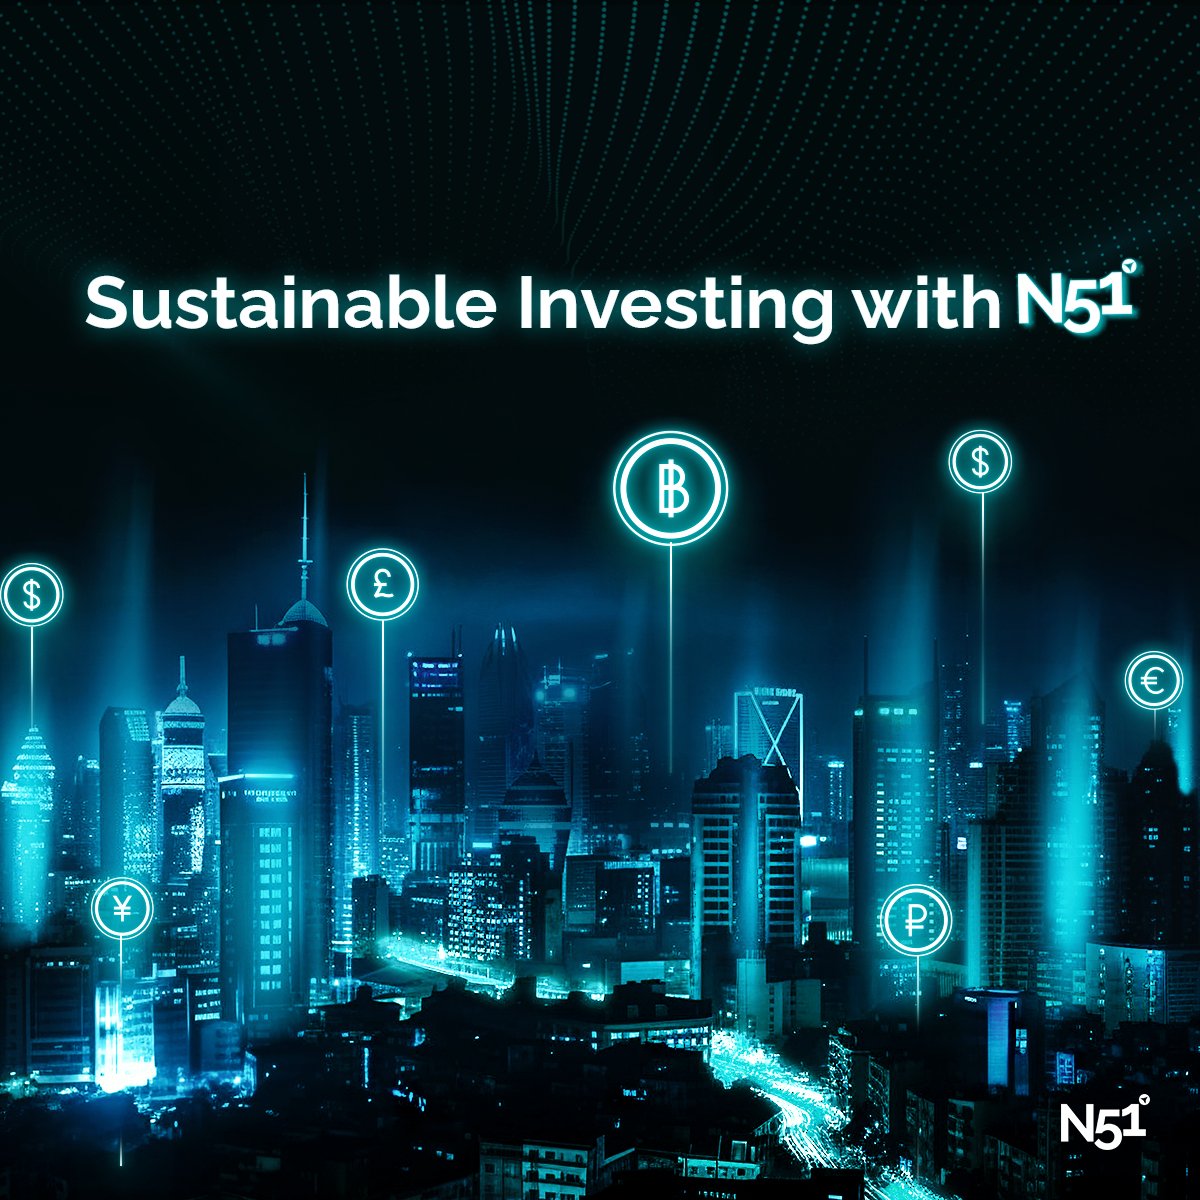 Invest sustainably with N51. ✨
Join us in supporting eco-friendly initiatives and responsible investing.✨

#SustainableInvesting #EcoFriendlyFinance #N51 #FutureOfFinance #tokenization